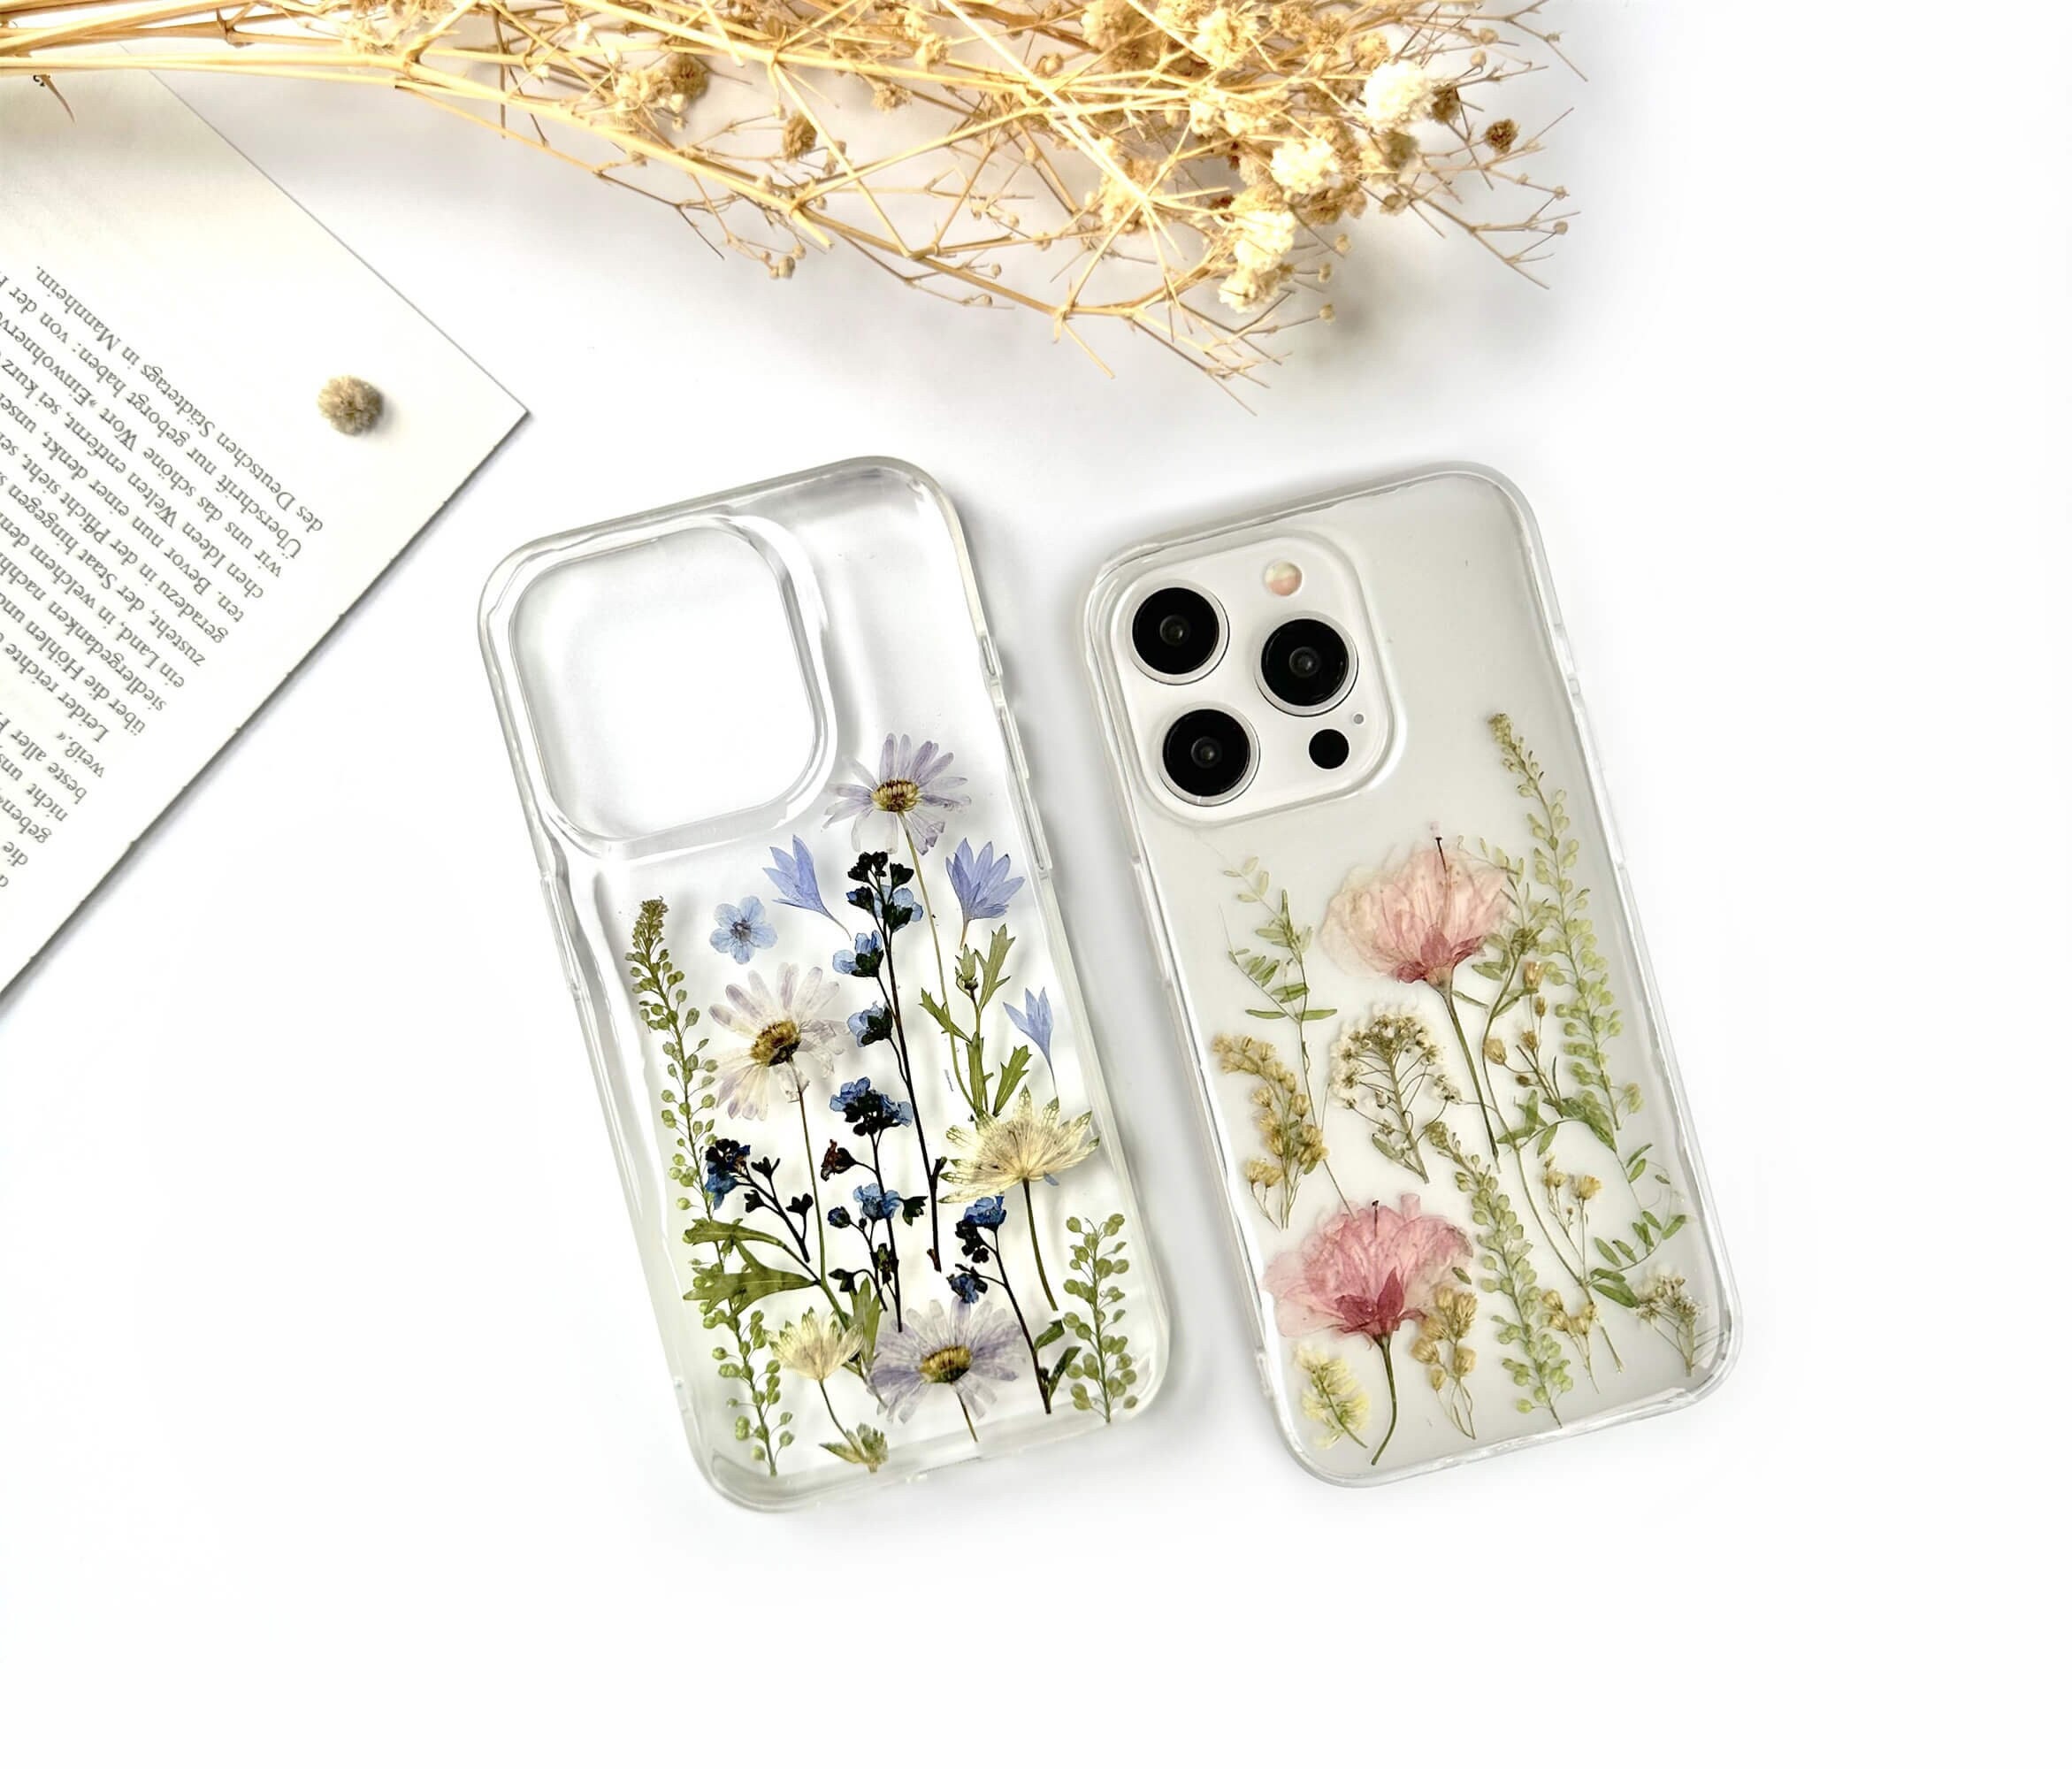 Designer Pattern Flower Phone Cases For IPhone 13 Pro Max 12 Mini 11 XS XR  X 8 7 Plus Luxury Square Case Back Cover Shell From Trust4u, $3.33